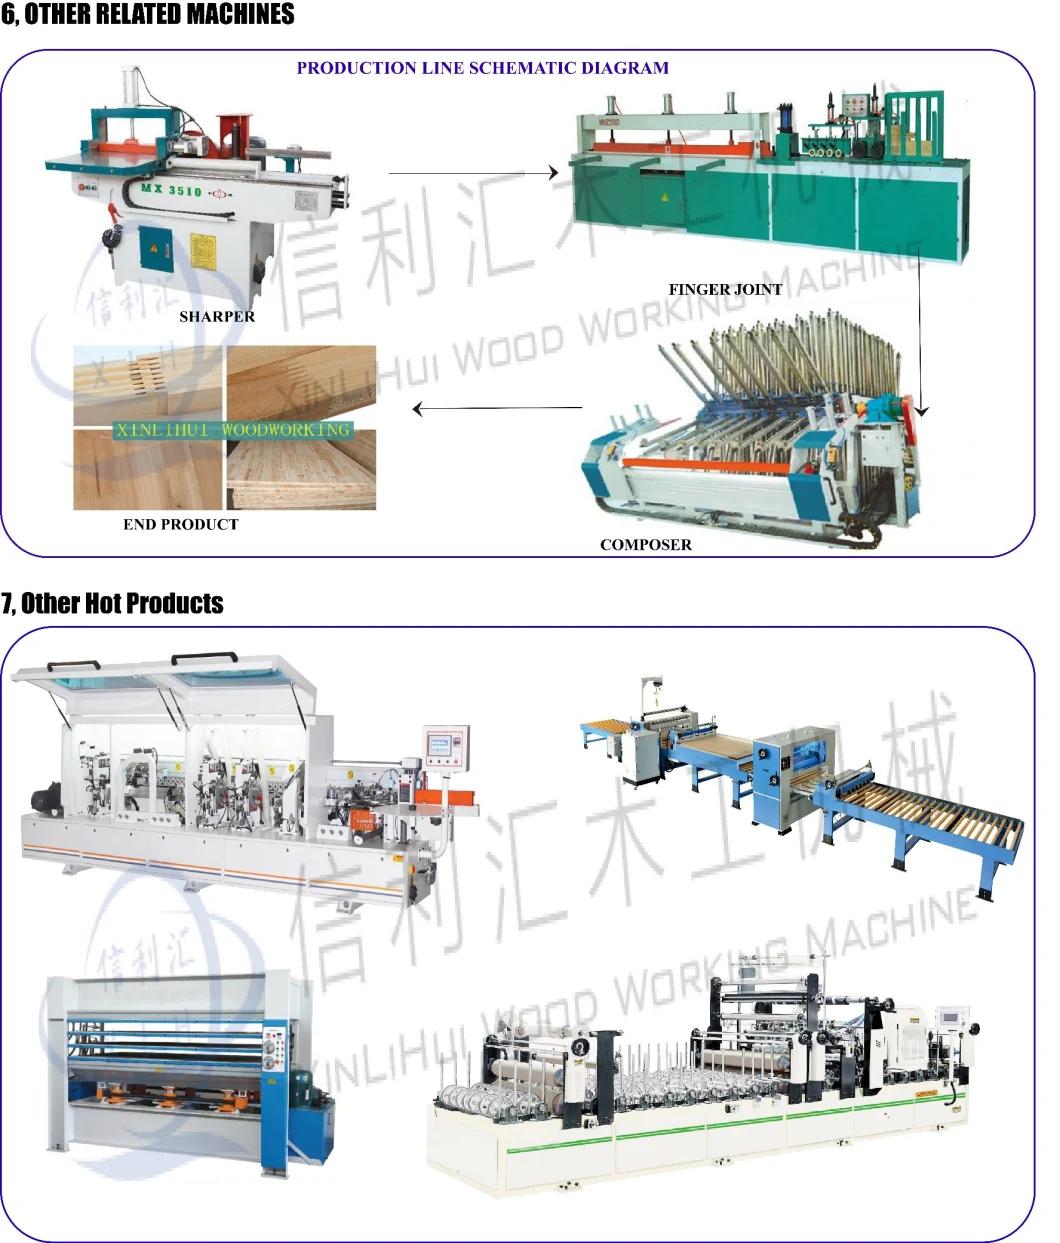 Double Blades Sliding Table Circular Sawmill Machine Log Cutting Circular Saw Table Circular Sawmill Round Logs Planks Cutting Saw Mills Woodworking Machine